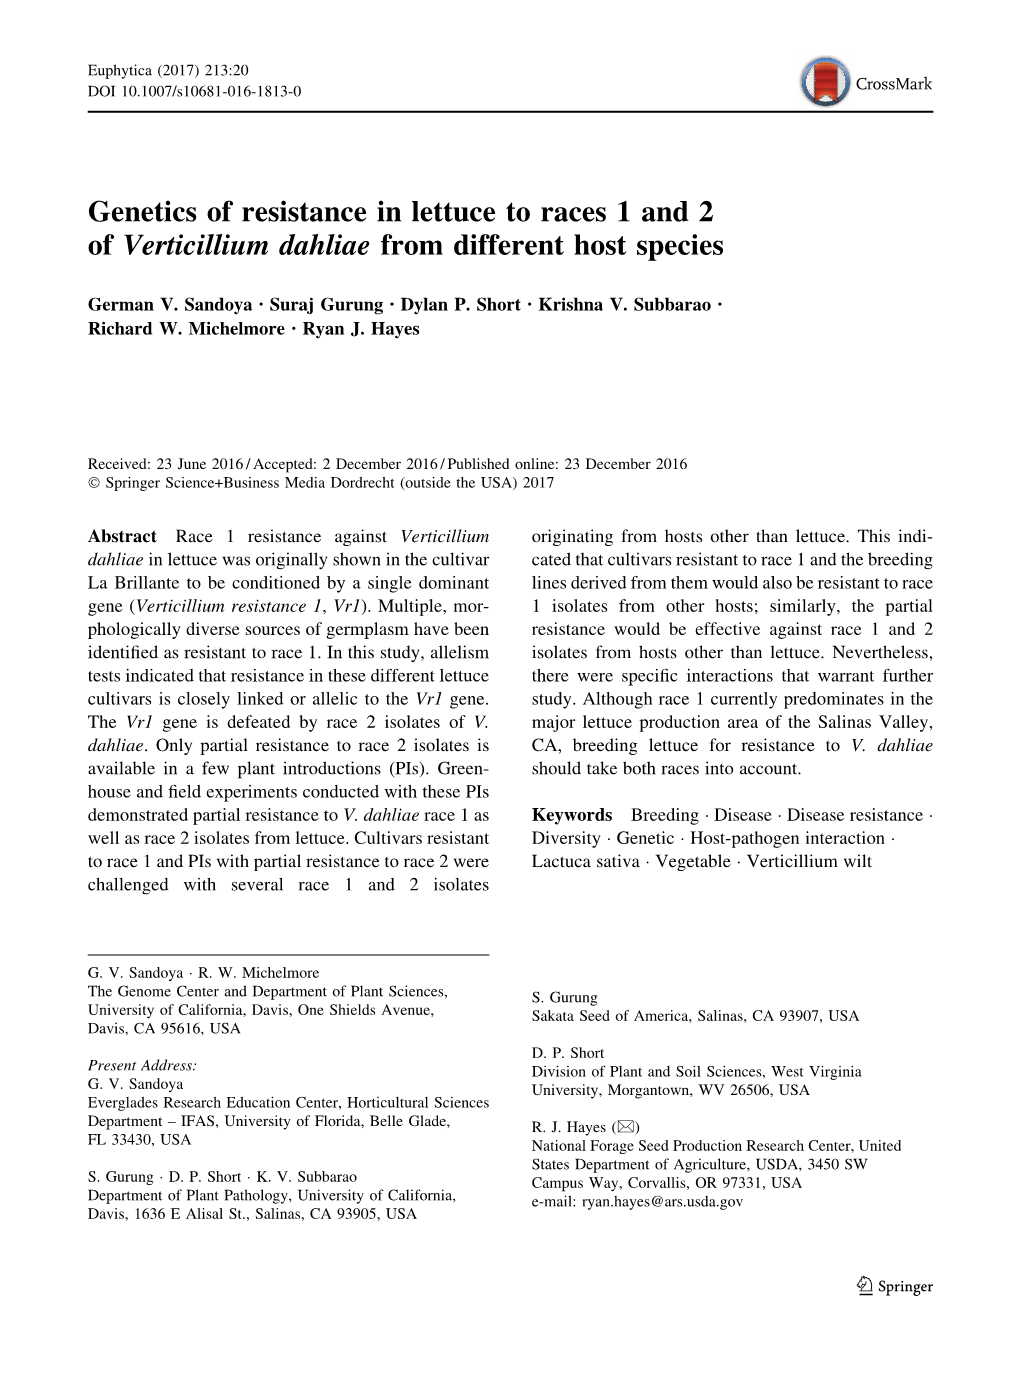 Genetics of Resistance in Lettuce to Races 1 and 2 of Verticillium Dahliae from Different Host Species